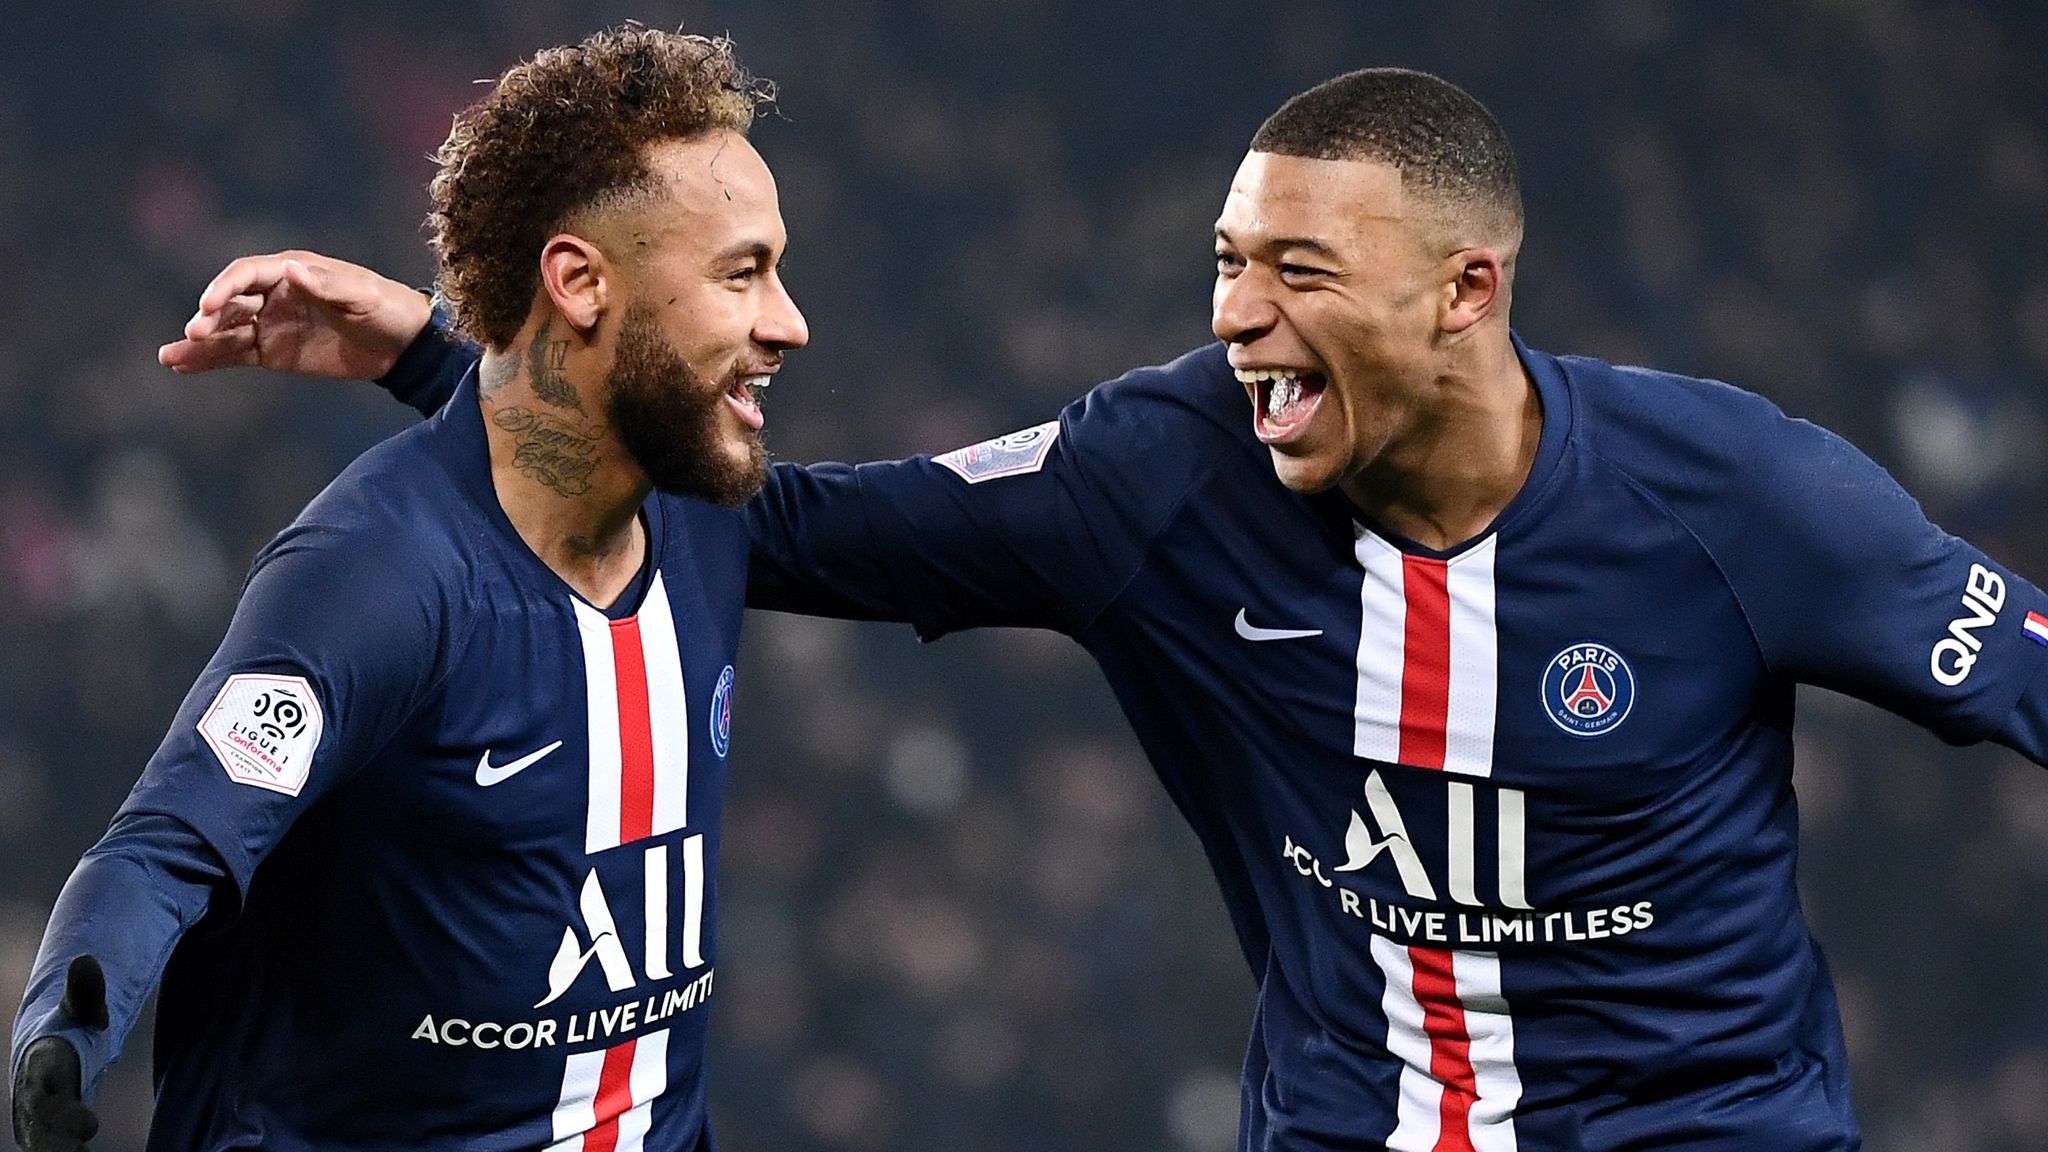 PSG begin contract renewal negotiations with Neymar and Real Madrid target  Kylian Mbappé - Football Espana